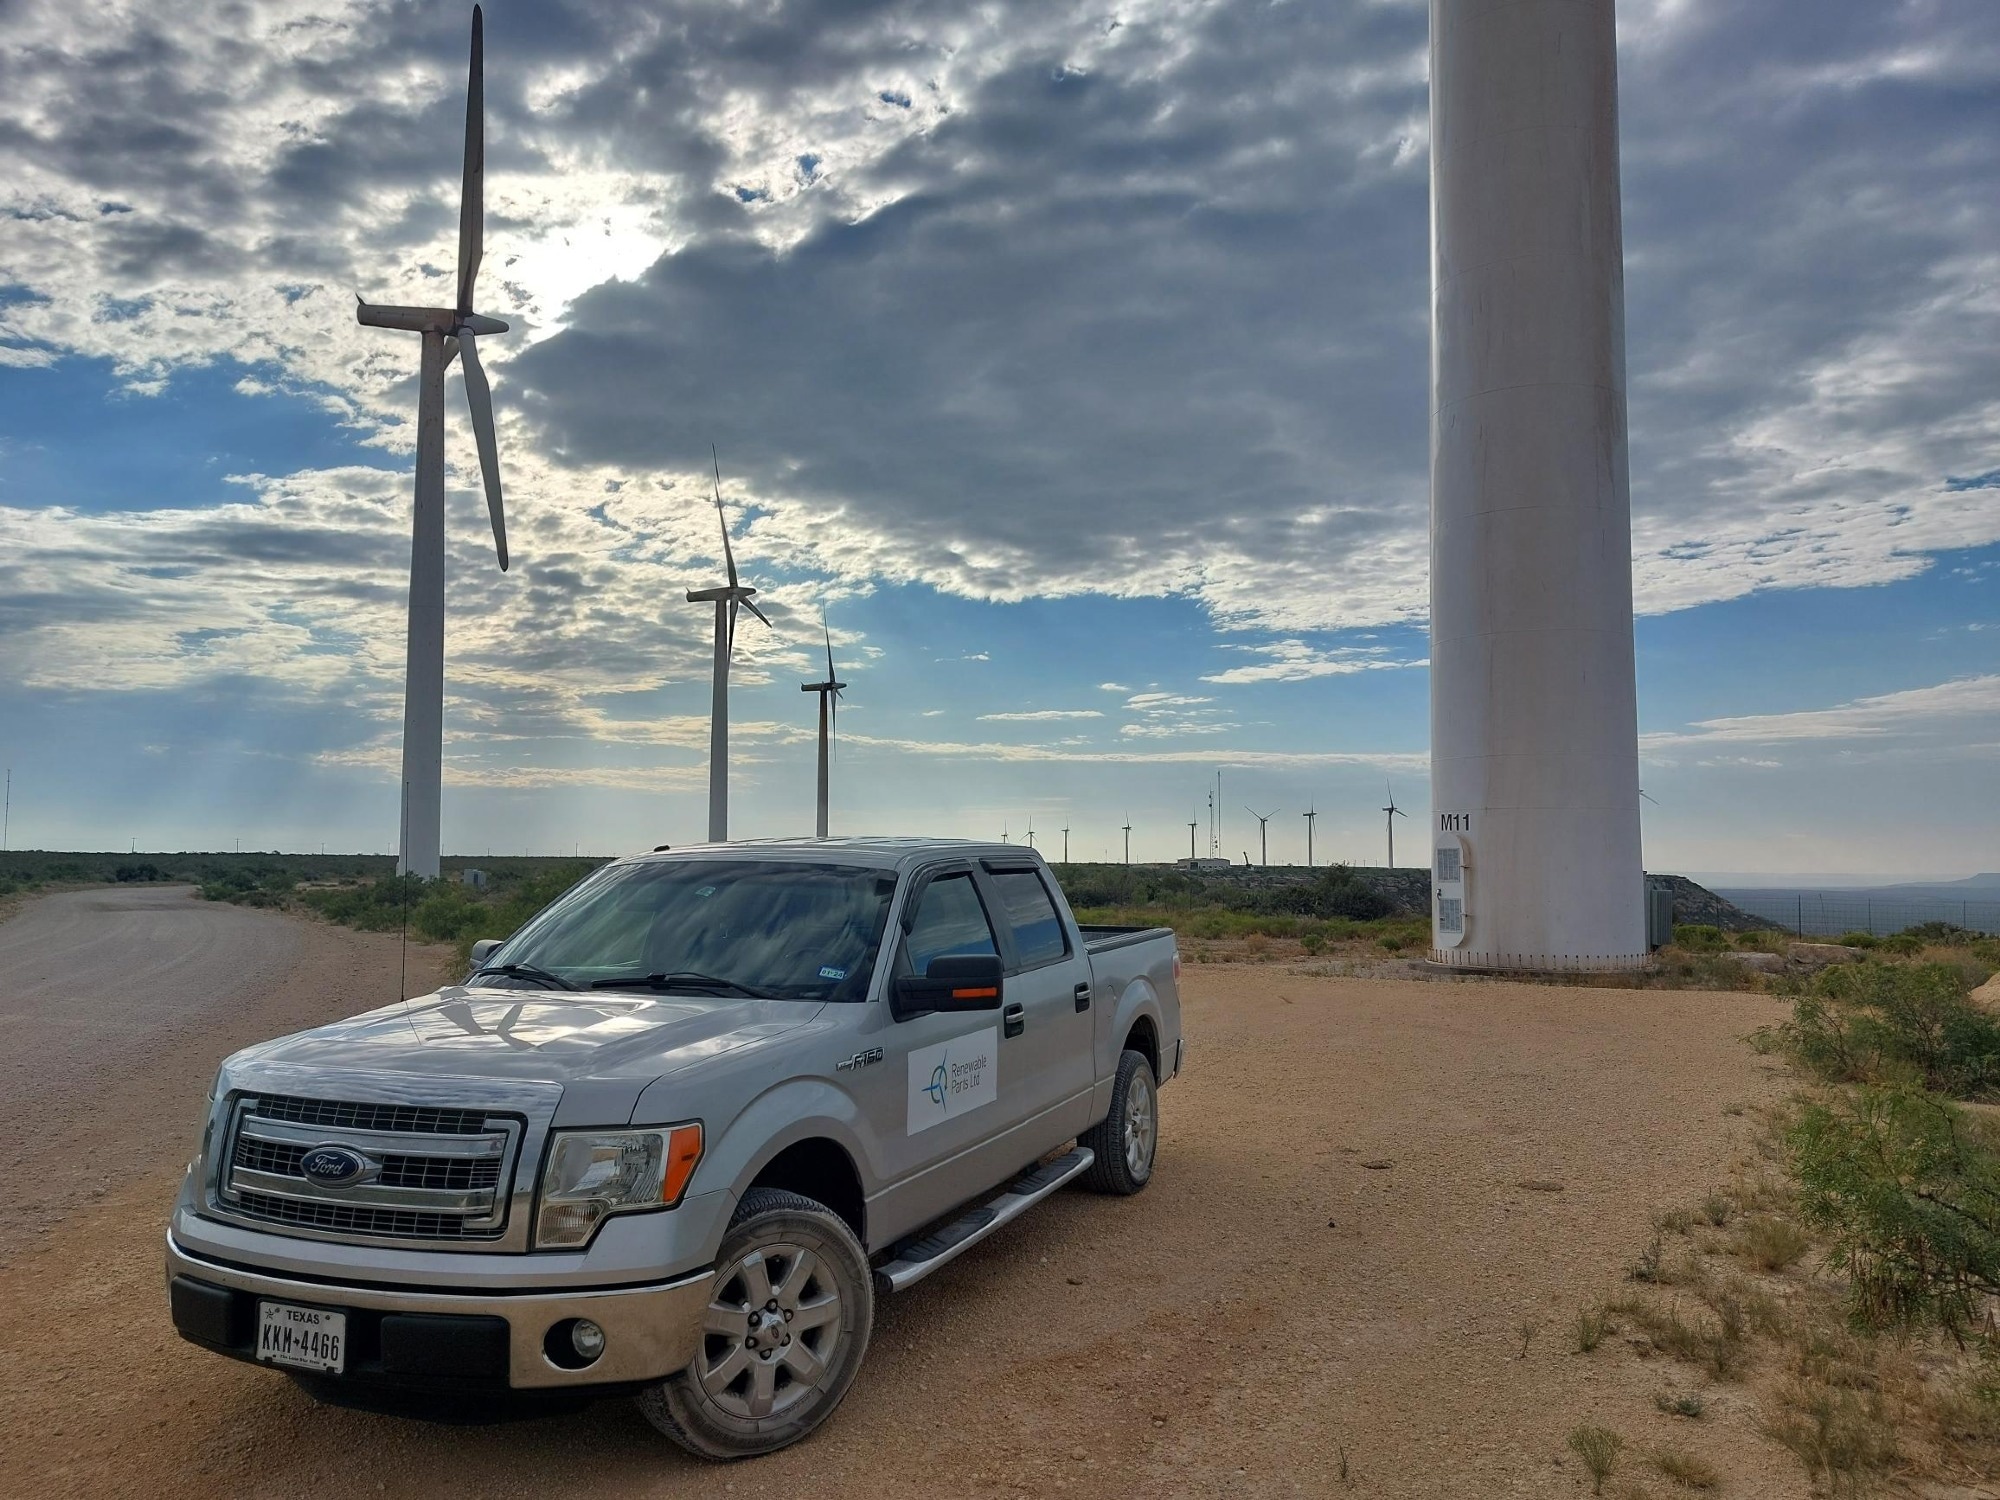 Renewable Parts Launches USA’s First Wind Turbine Component Recirculation Centre in Lone Star State